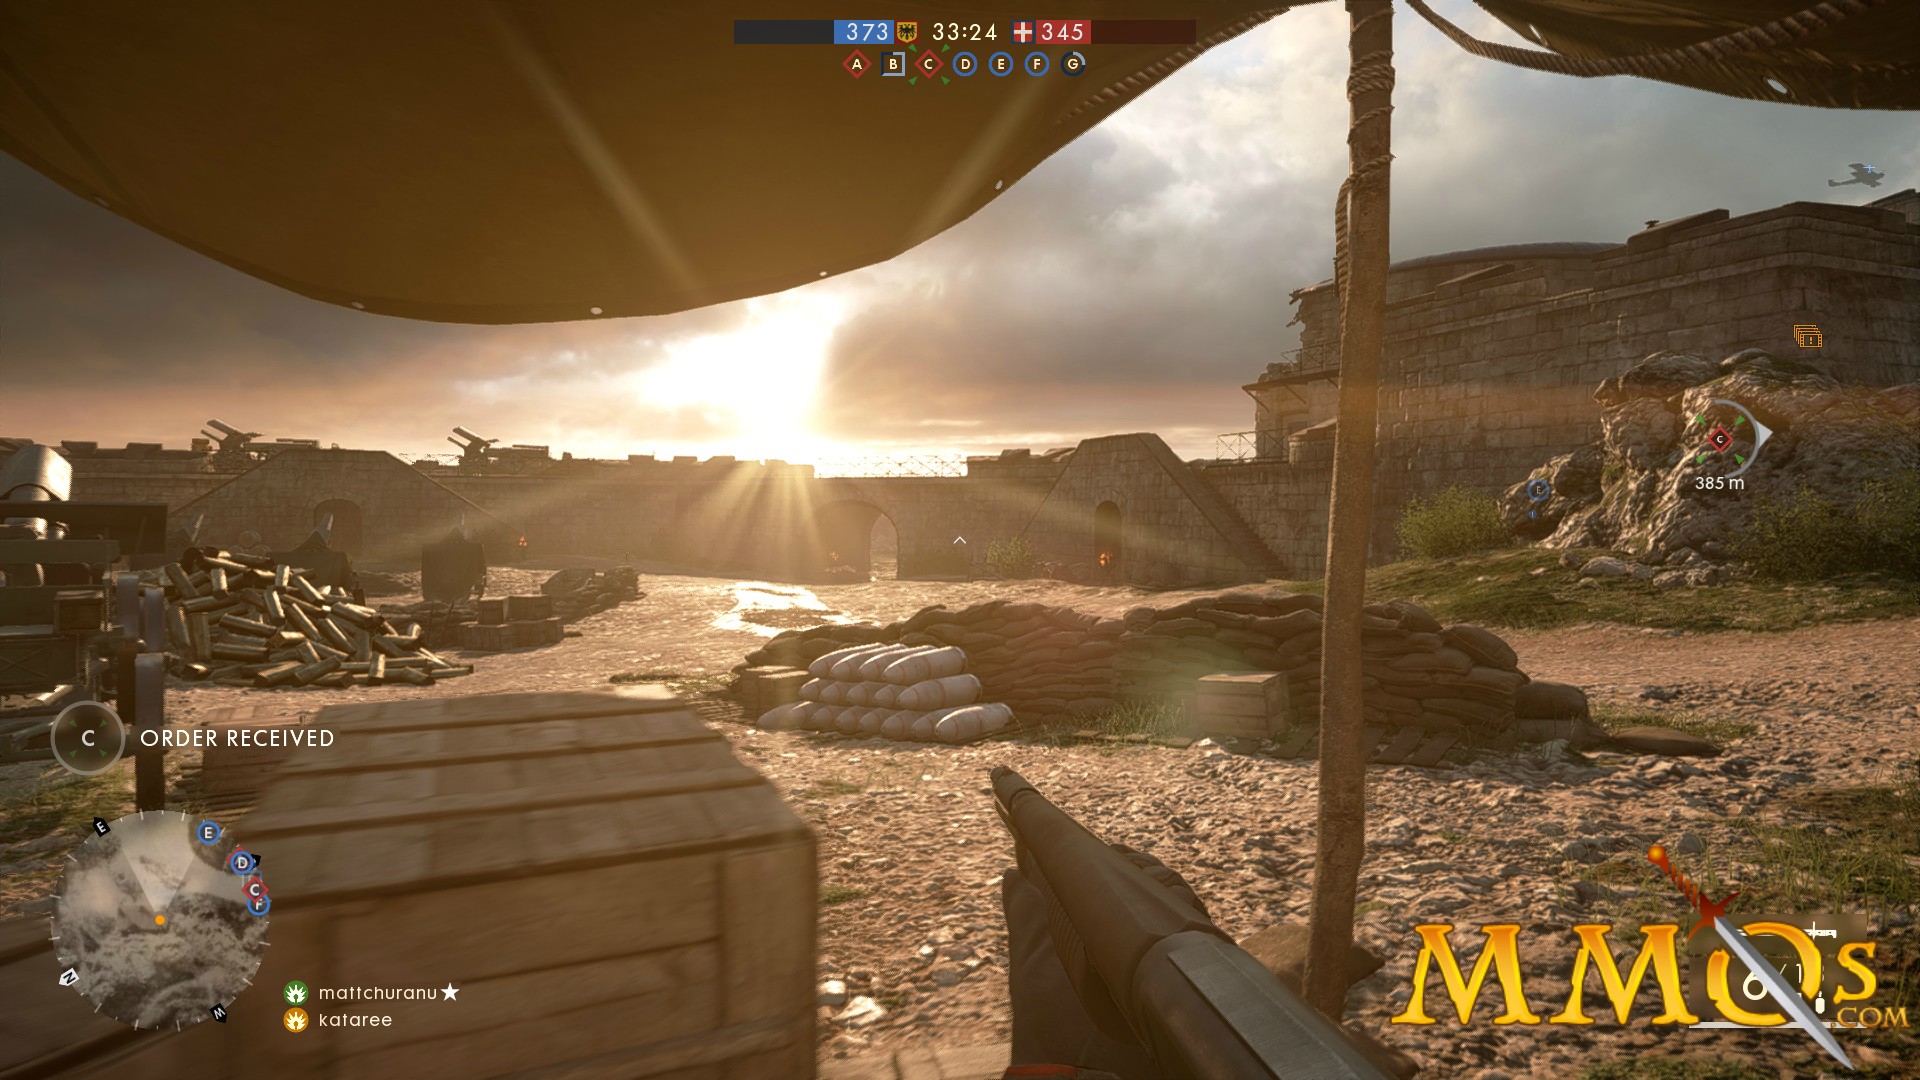 Is Battlefield 1 Crossplay? Battlefield 1 Gameplay, Overview, and